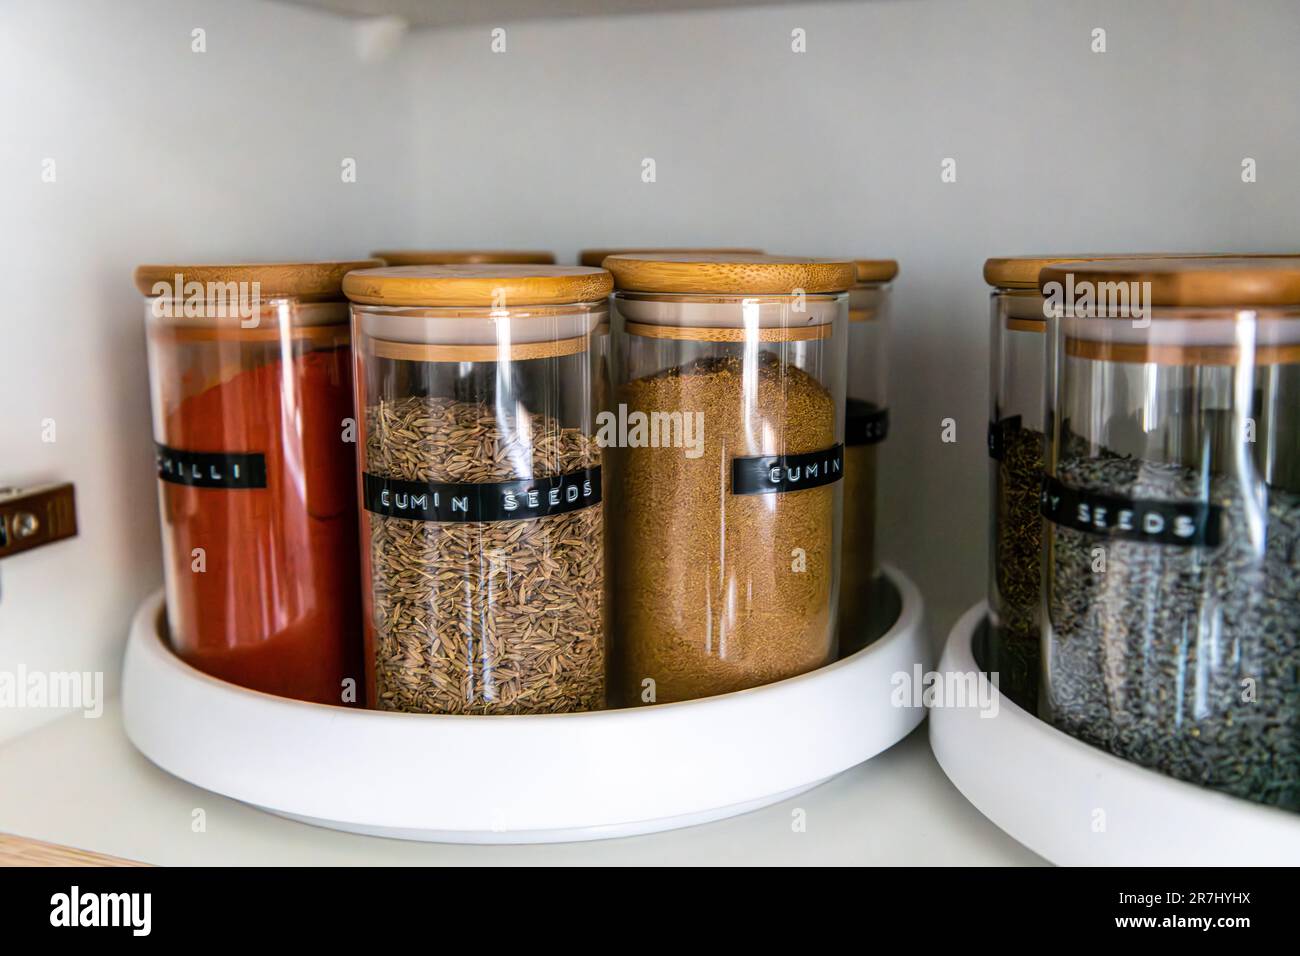 https://c8.alamy.com/comp/2R7HYHX/organized-labeled-food-pantry-in-a-home-kitchen-with-spices-2R7HYHX.jpg